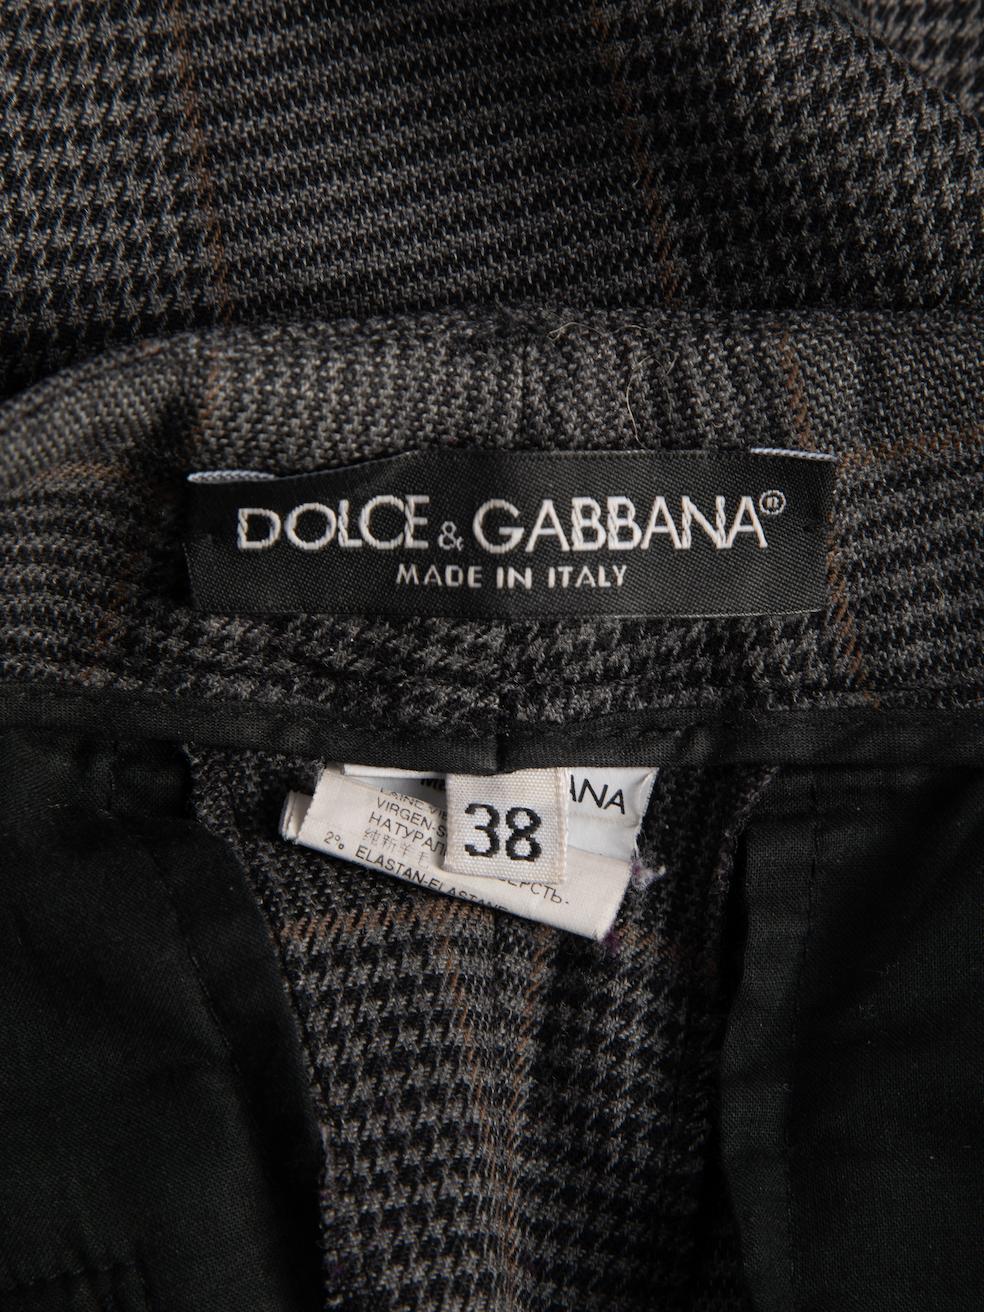 Dolce & Gabbana Women's Grey Plaid Slim Fit Trousers For Sale 1